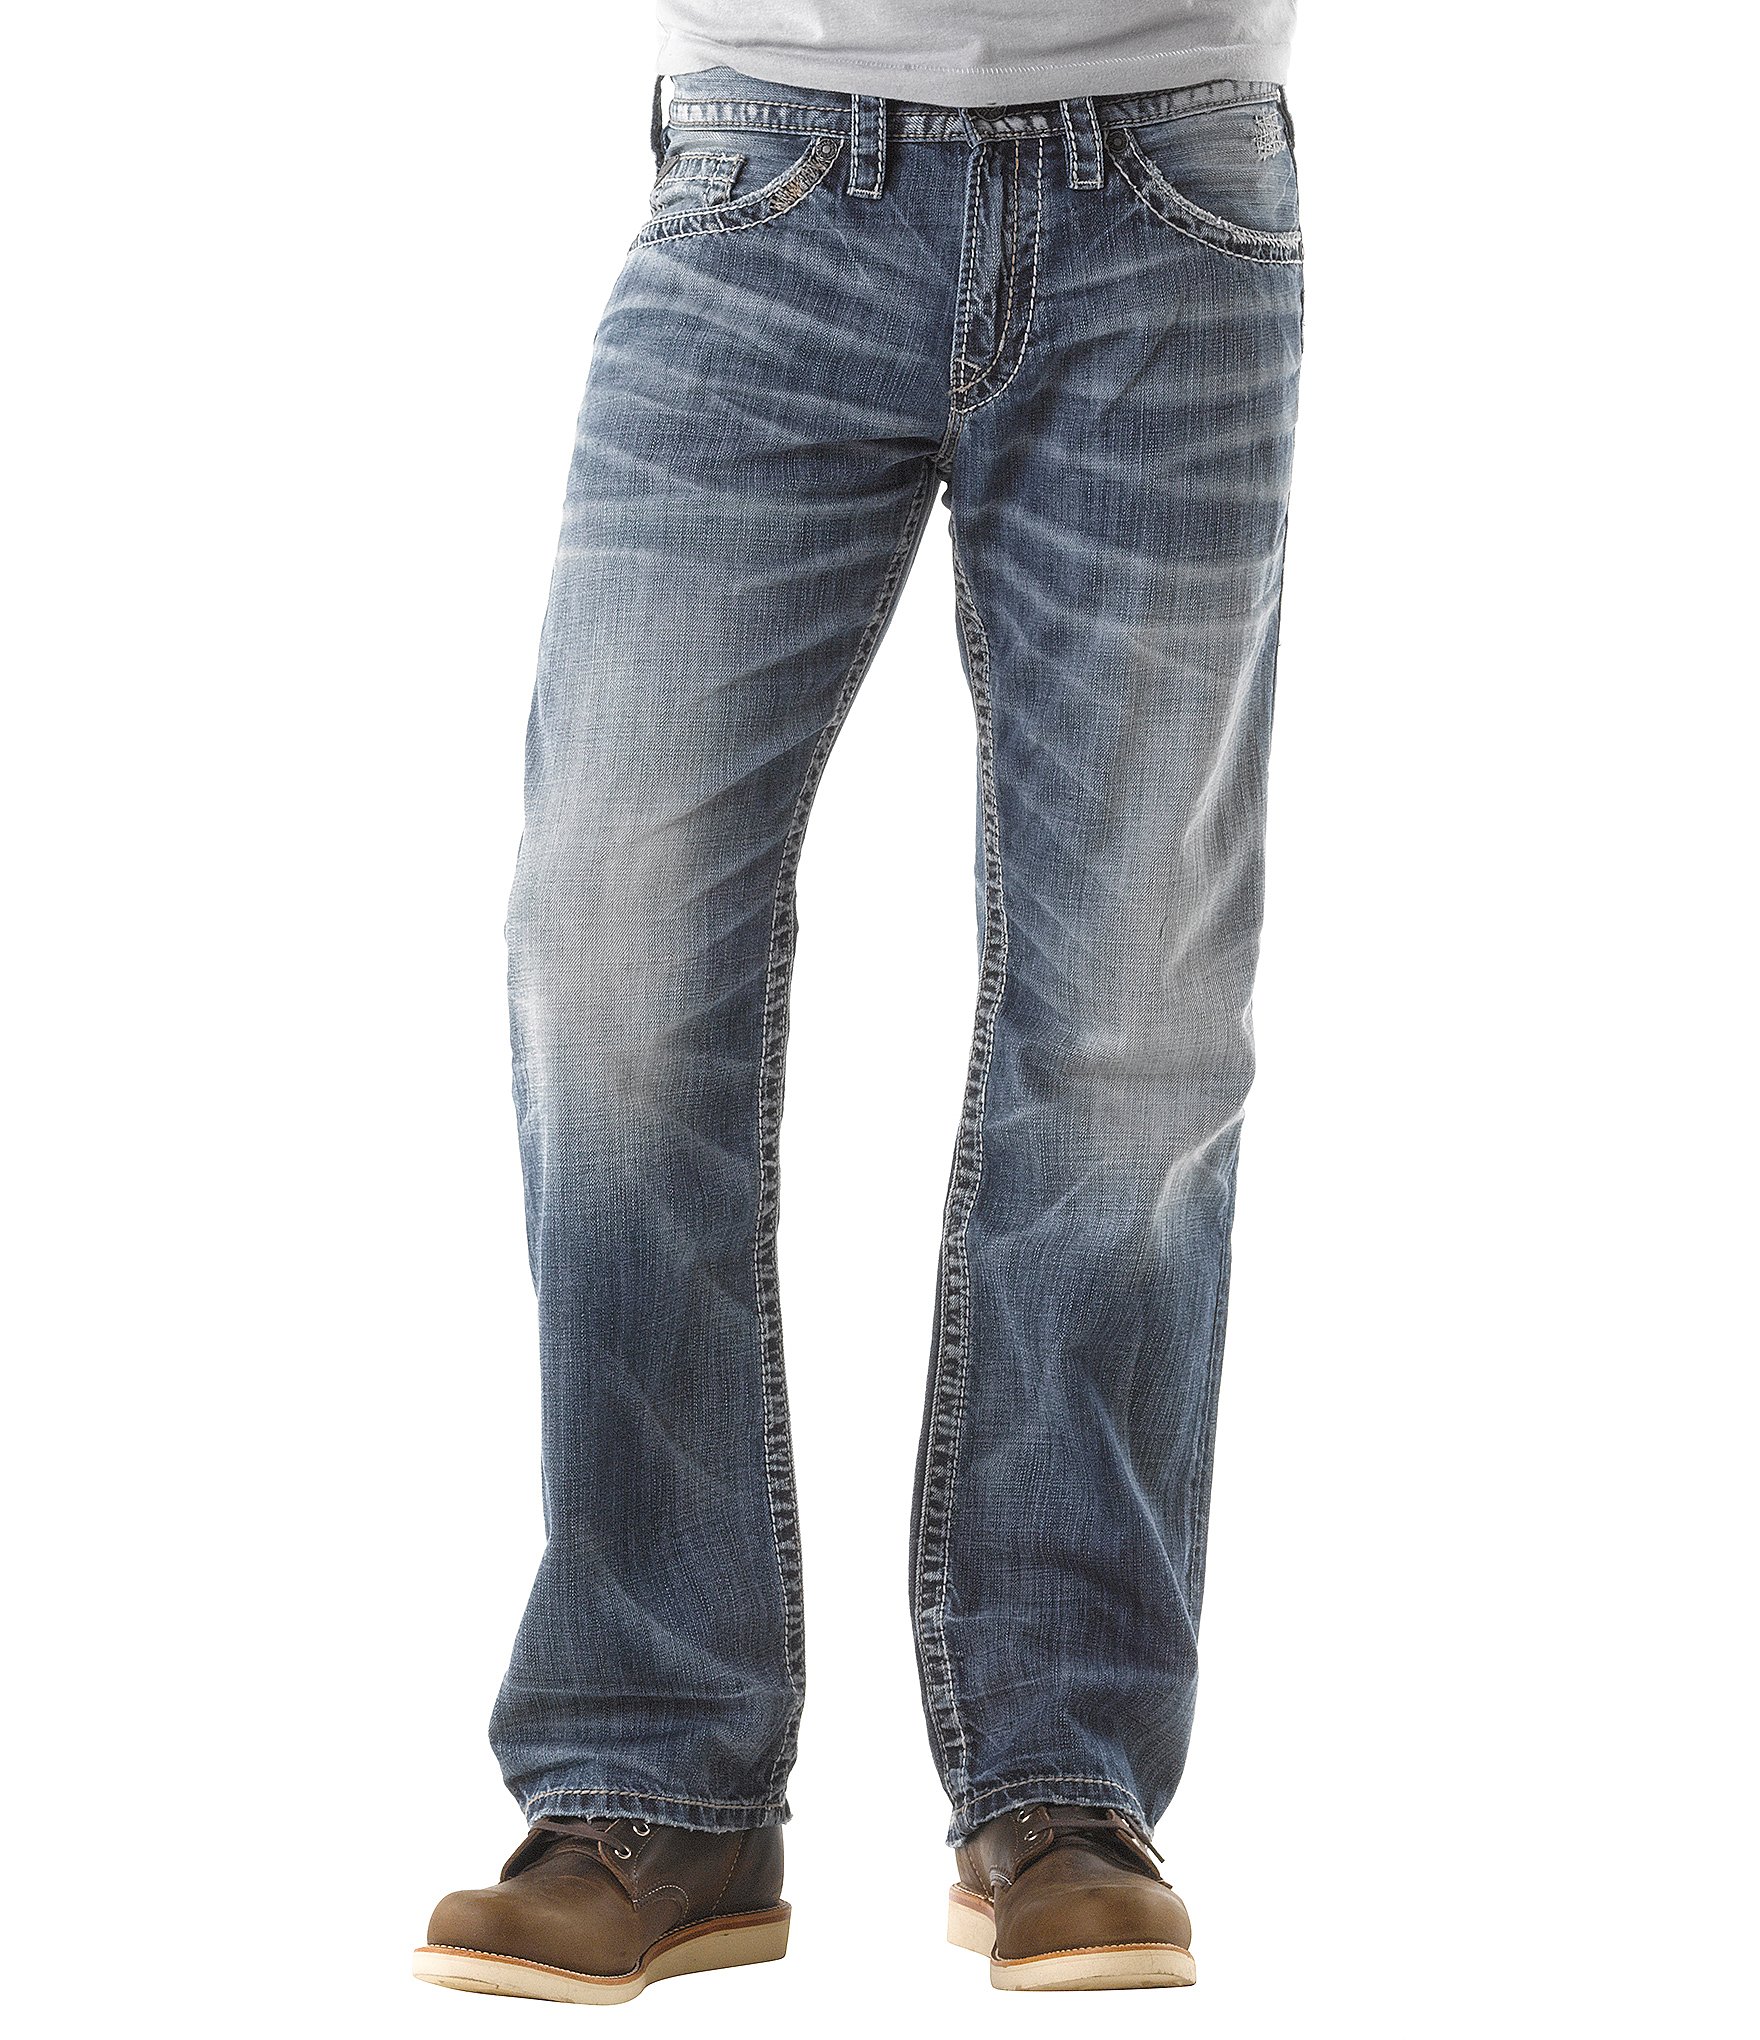 Men's Relaxed-Fit Jeans| Dillards